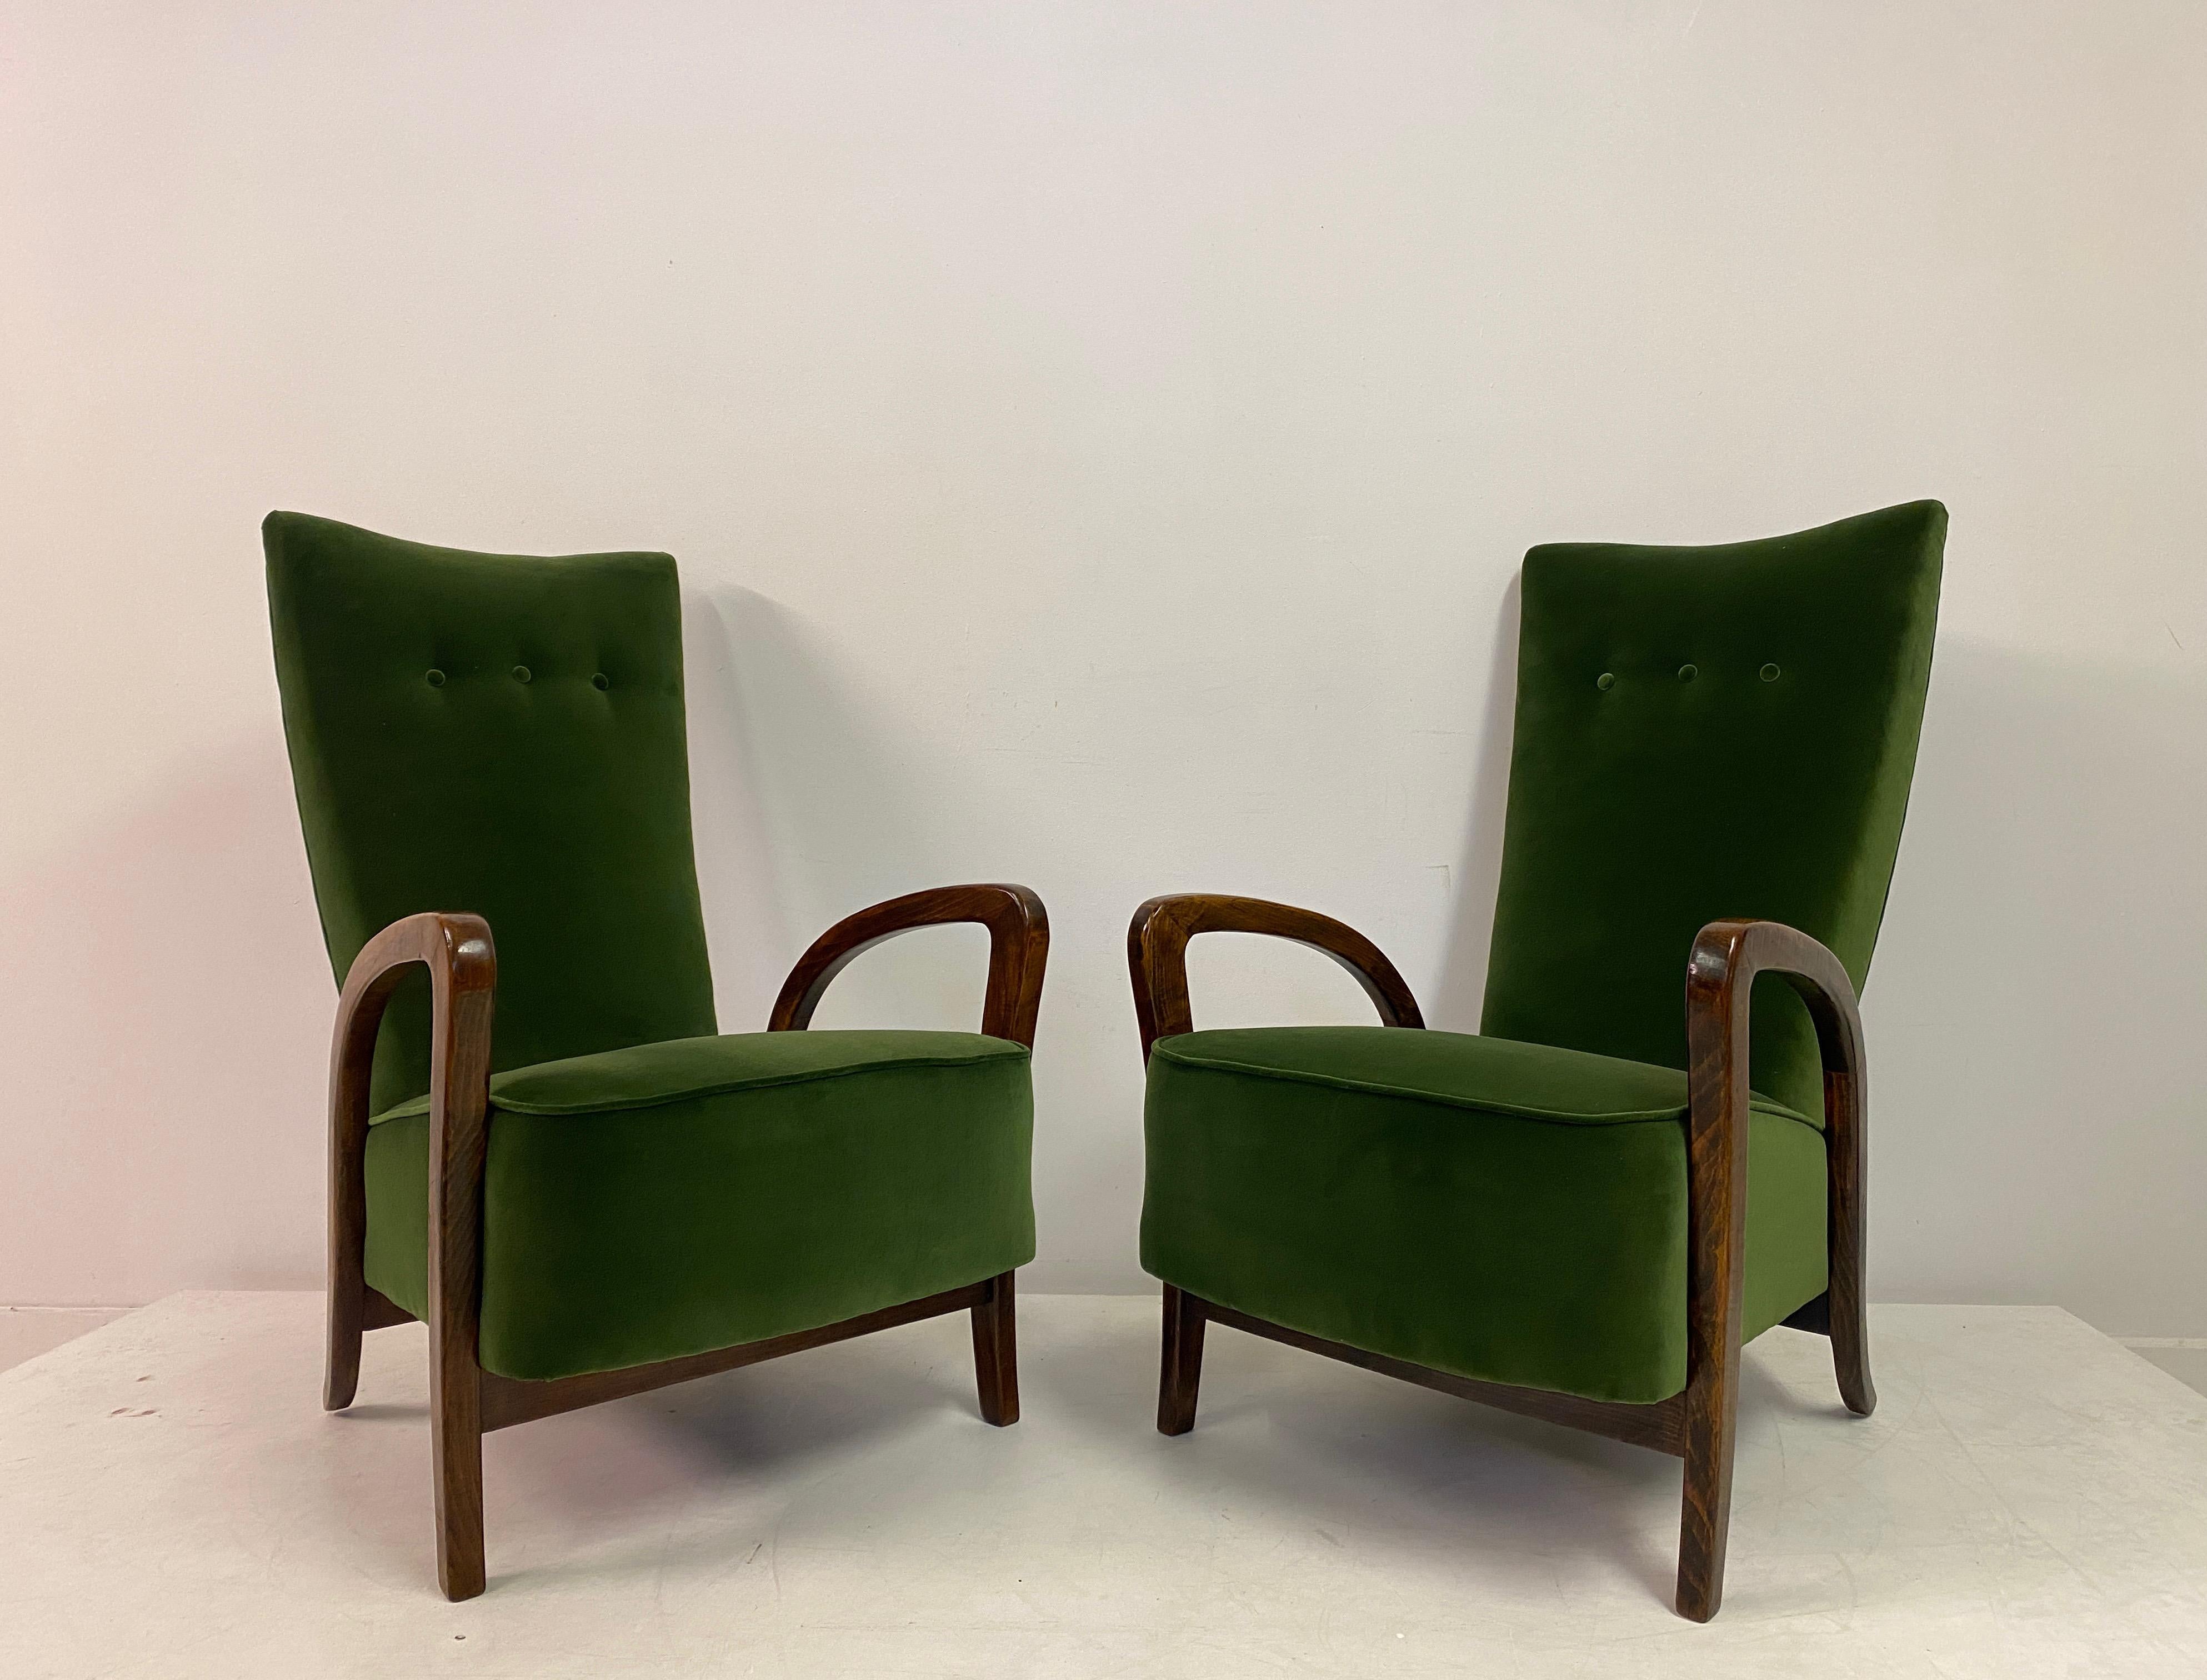 Pair of 1950s Italian Armchairs in Green Velvet In Good Condition For Sale In London, London